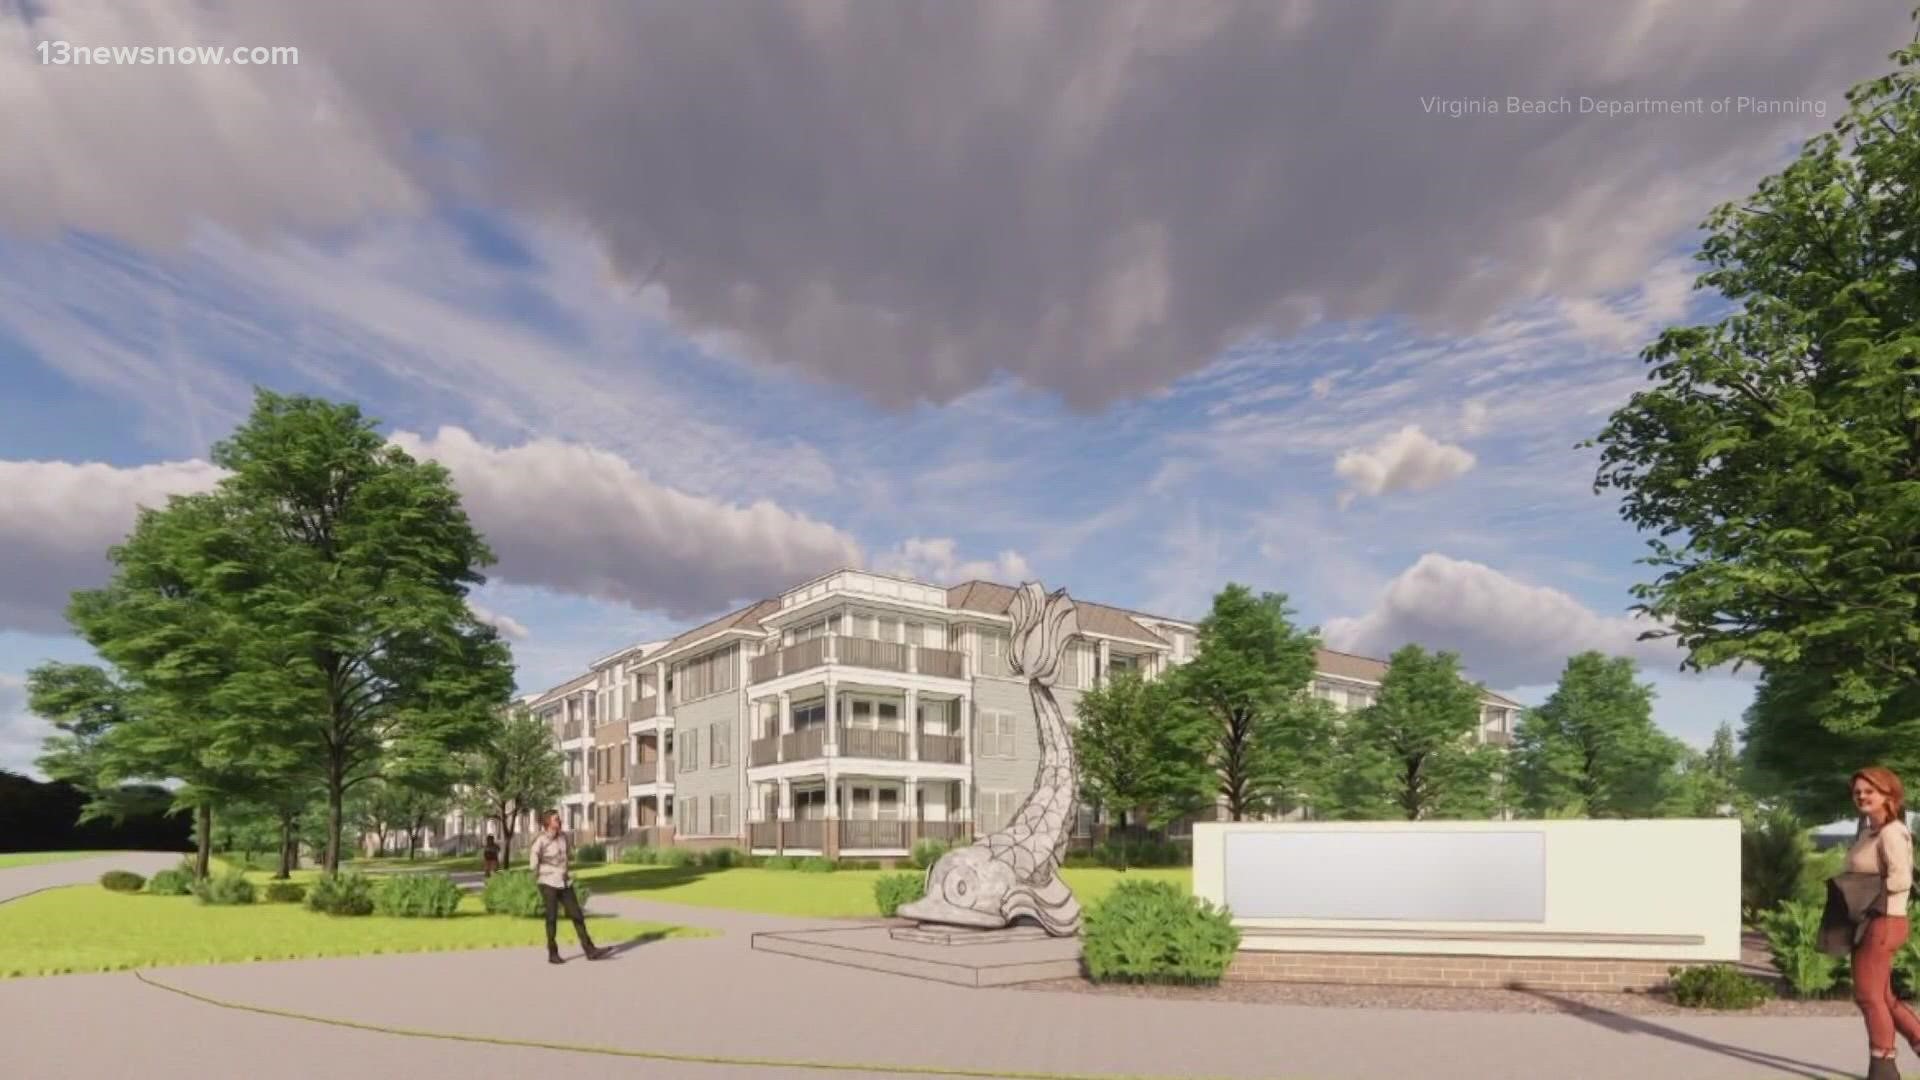 A 200-unit apartment building is no longer coming to Virginia Beach after developers withdrew their proposal.